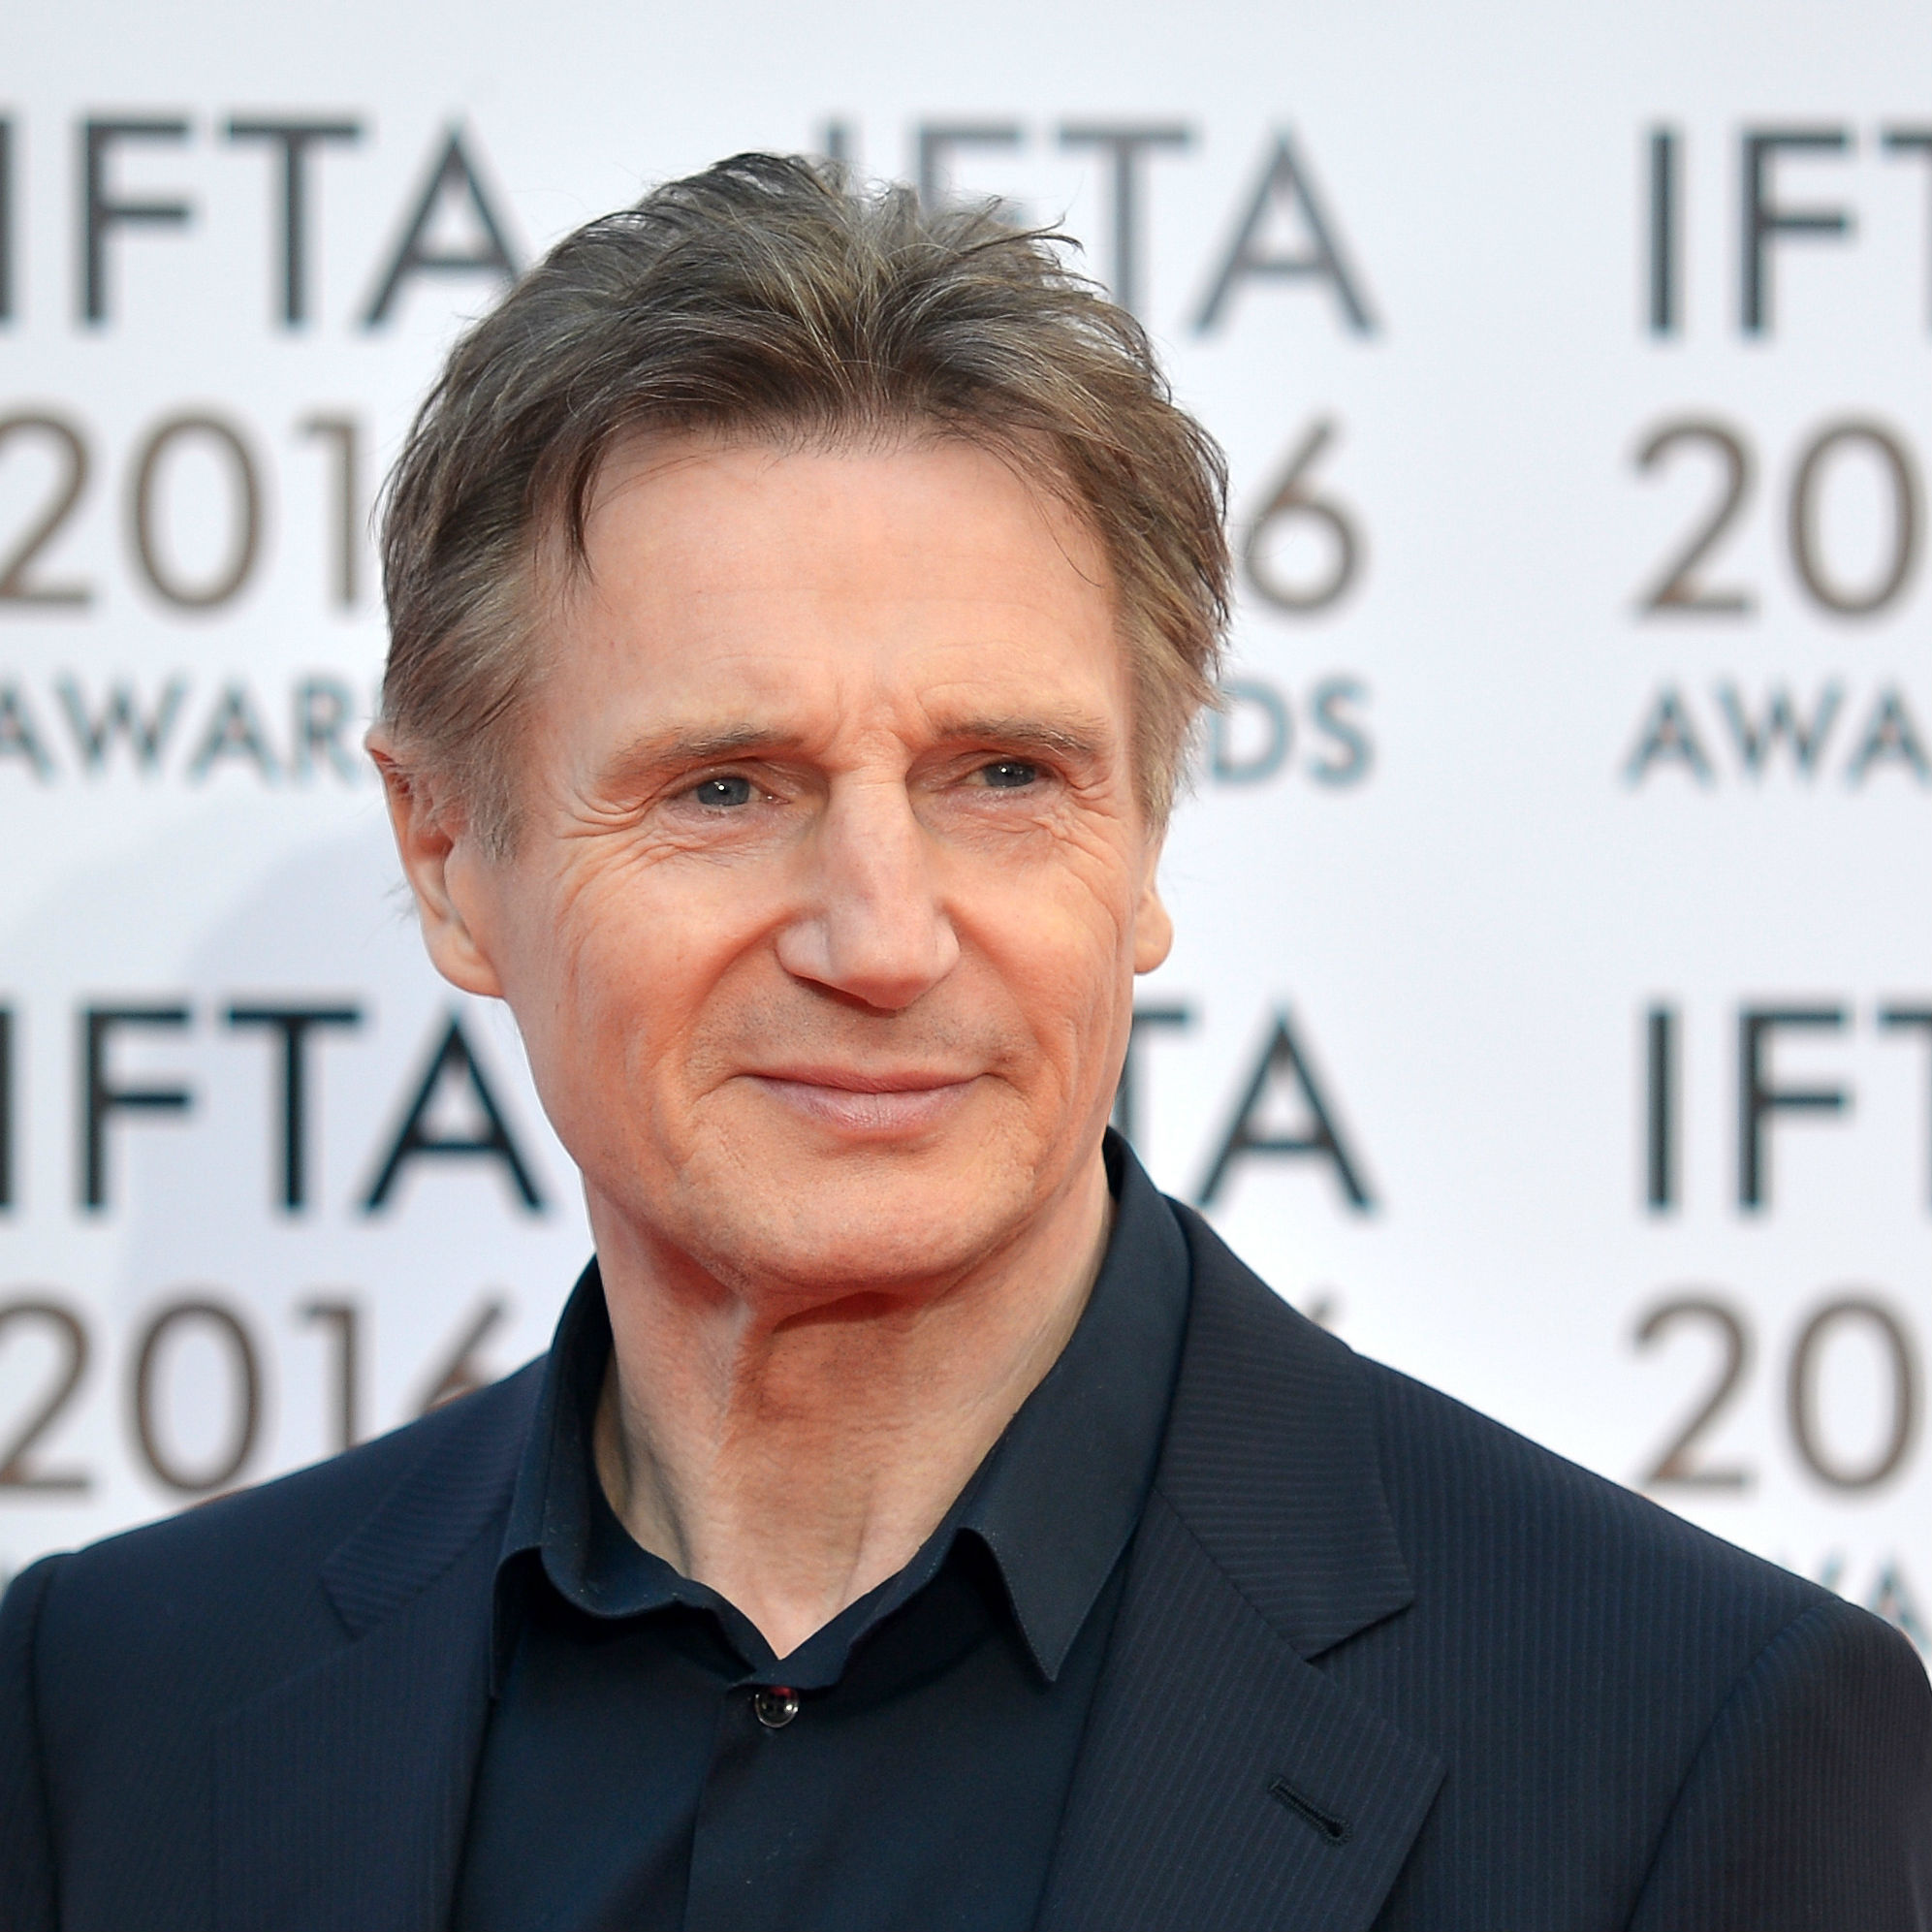 Actor Liam Neeson calls for Catholic and Protestant school integration in Northern Ireland